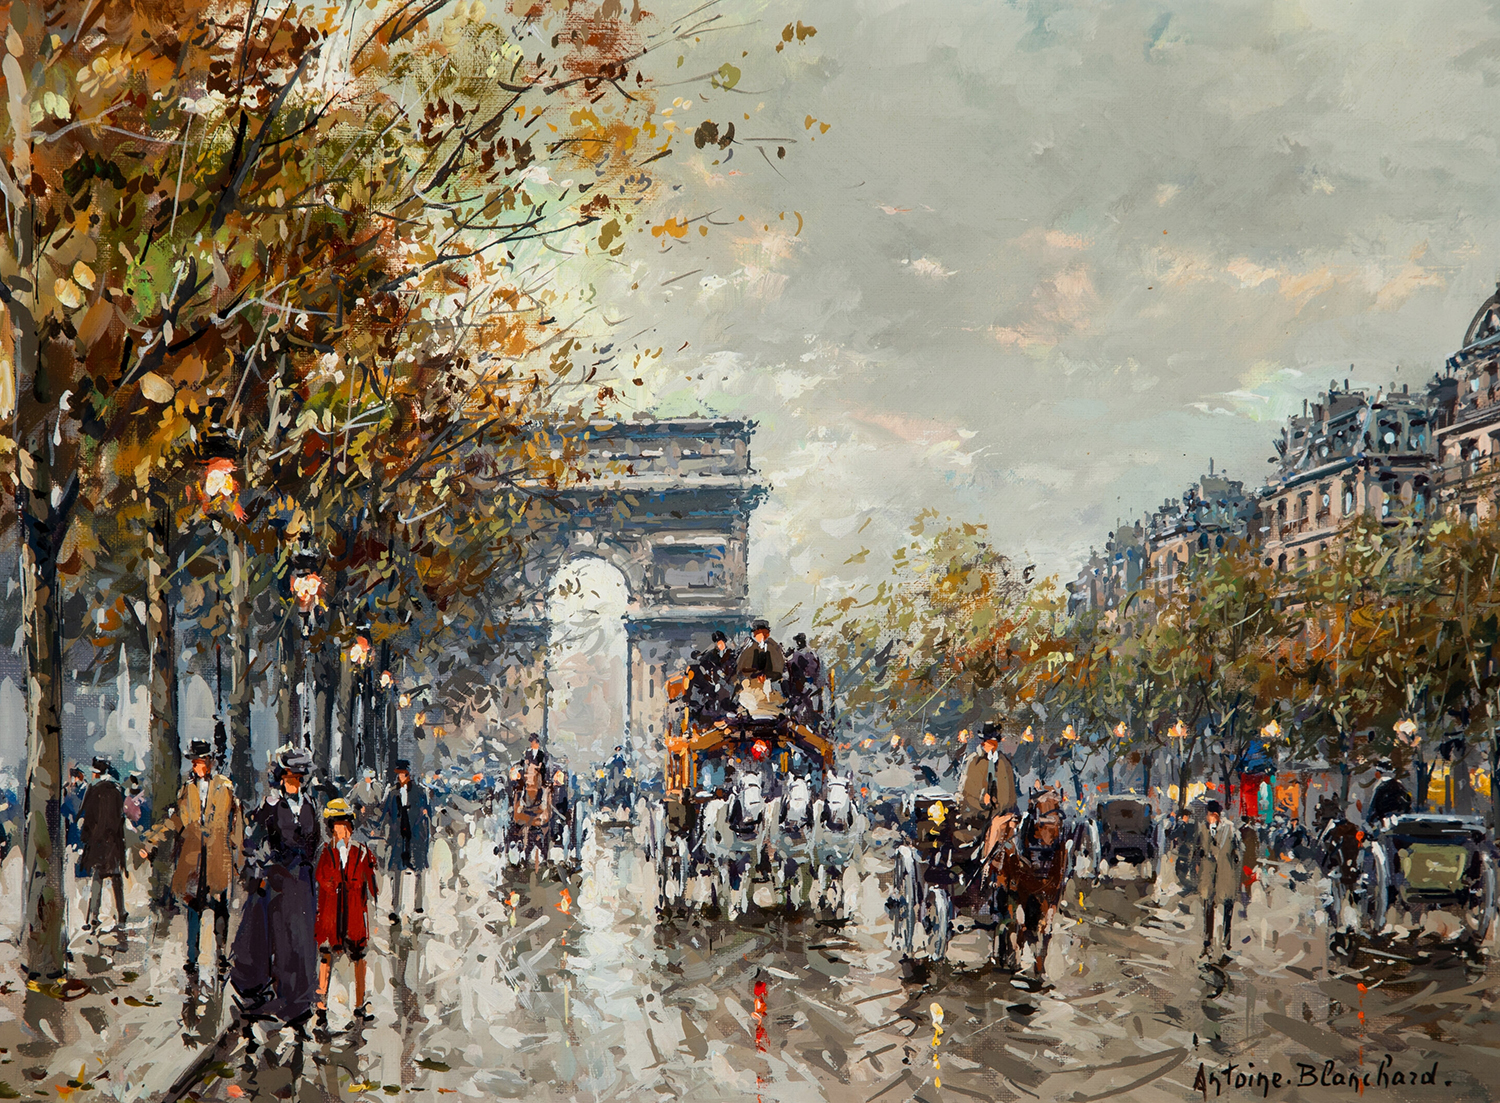 The arc de triomhe in paris with people and horse and buggies on the street